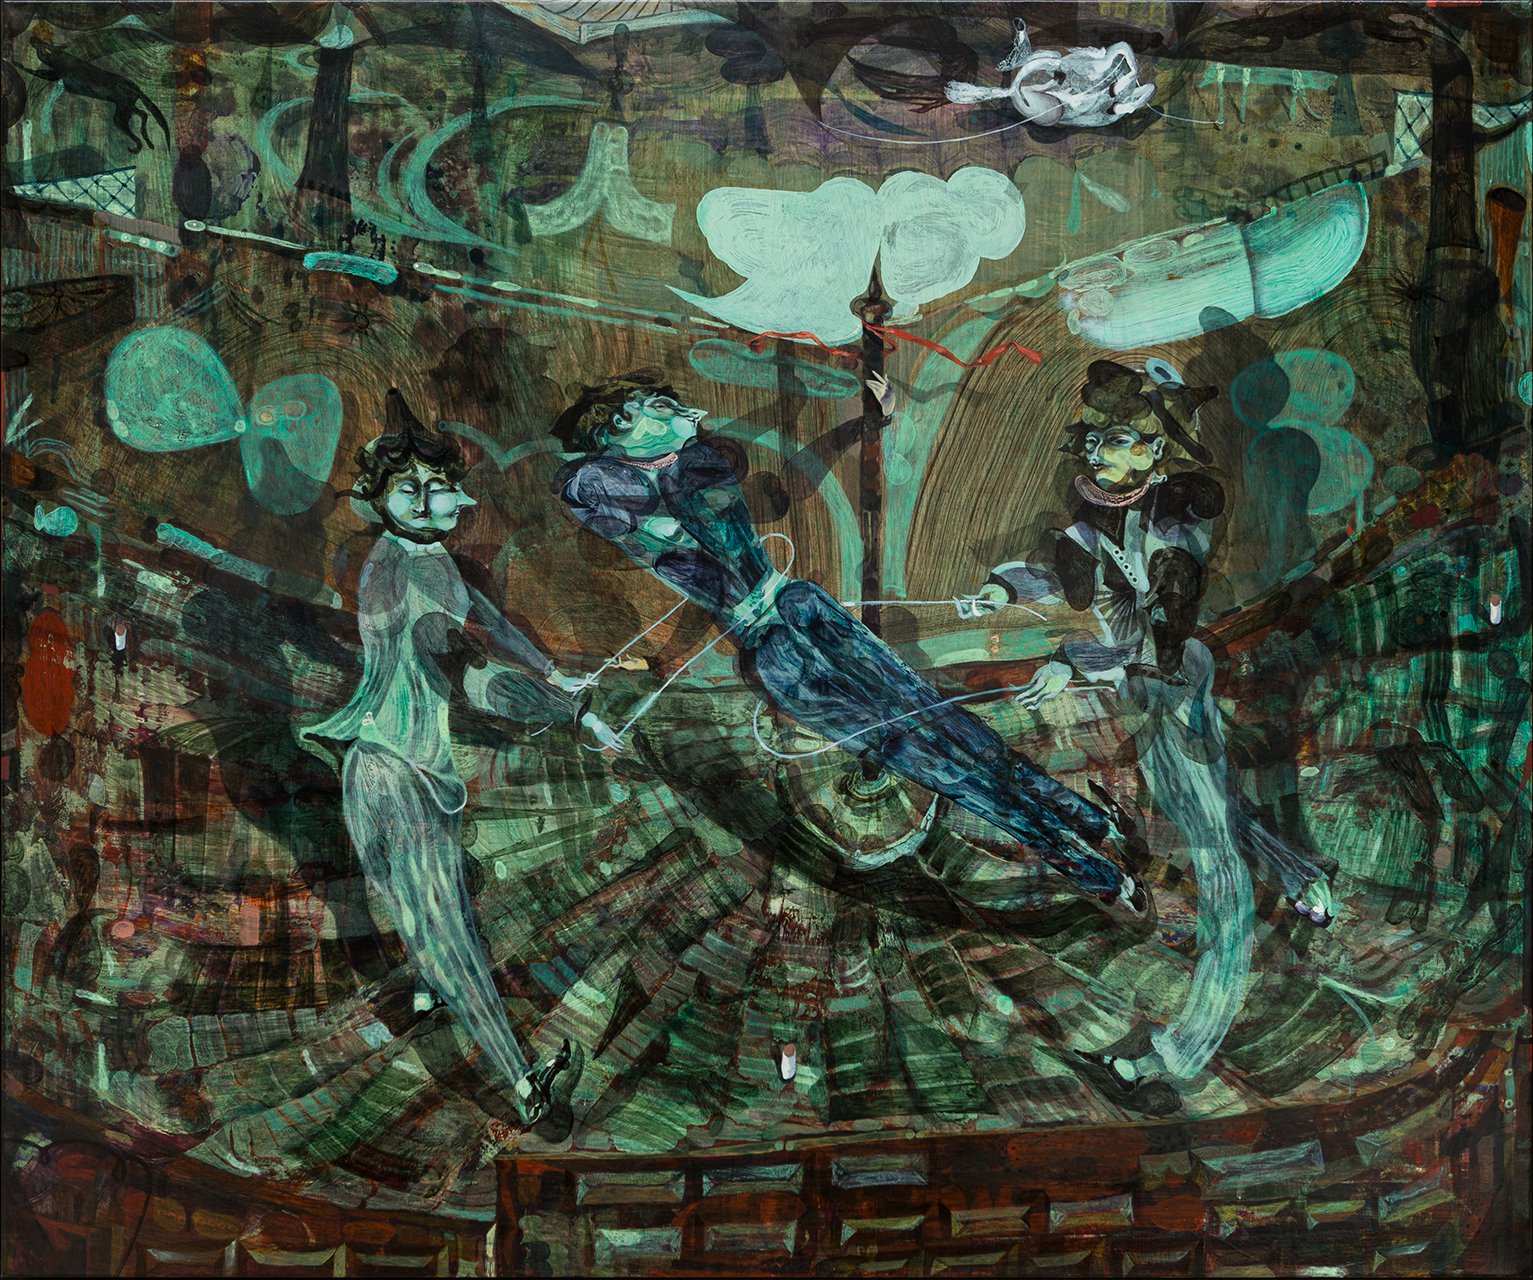 Guglielmo Castelli, Space more than time, oil on canvas, 100 x 120 cm (39 3/8 x 47 1/4 in), 2022